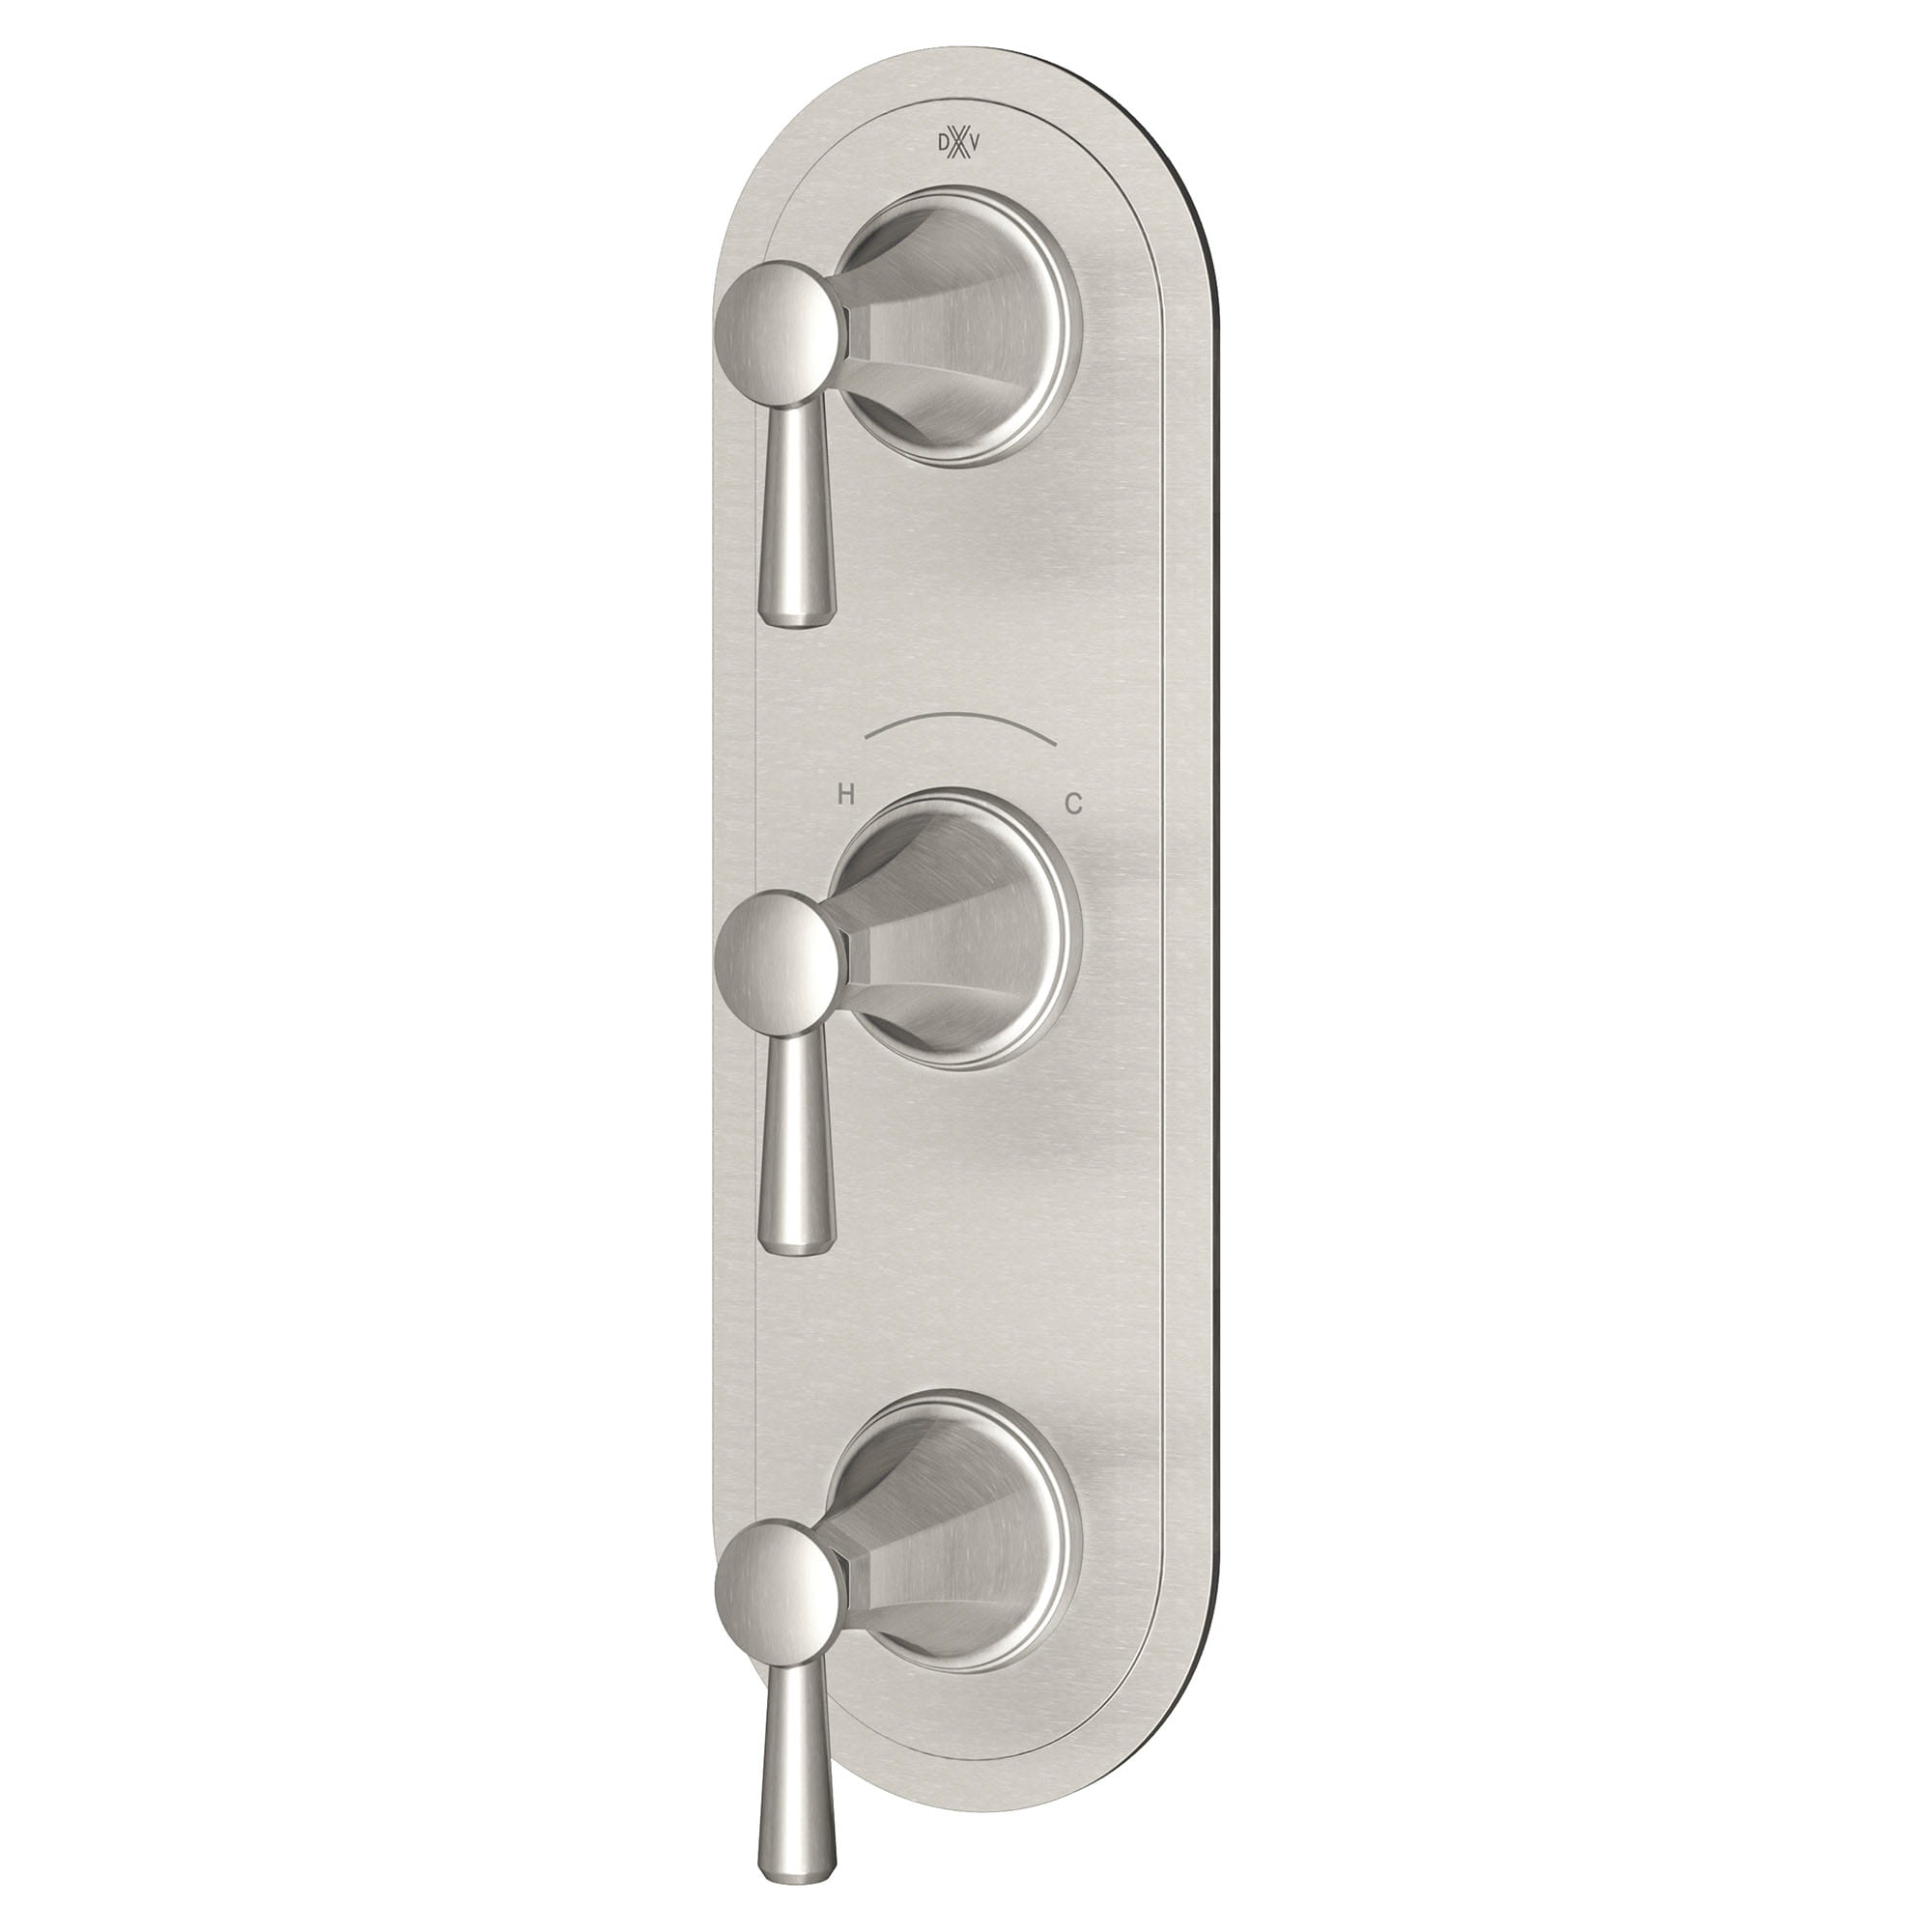 Fitzgerald 3-Handle Thermostatic Valve Trim Only with Lever Handles